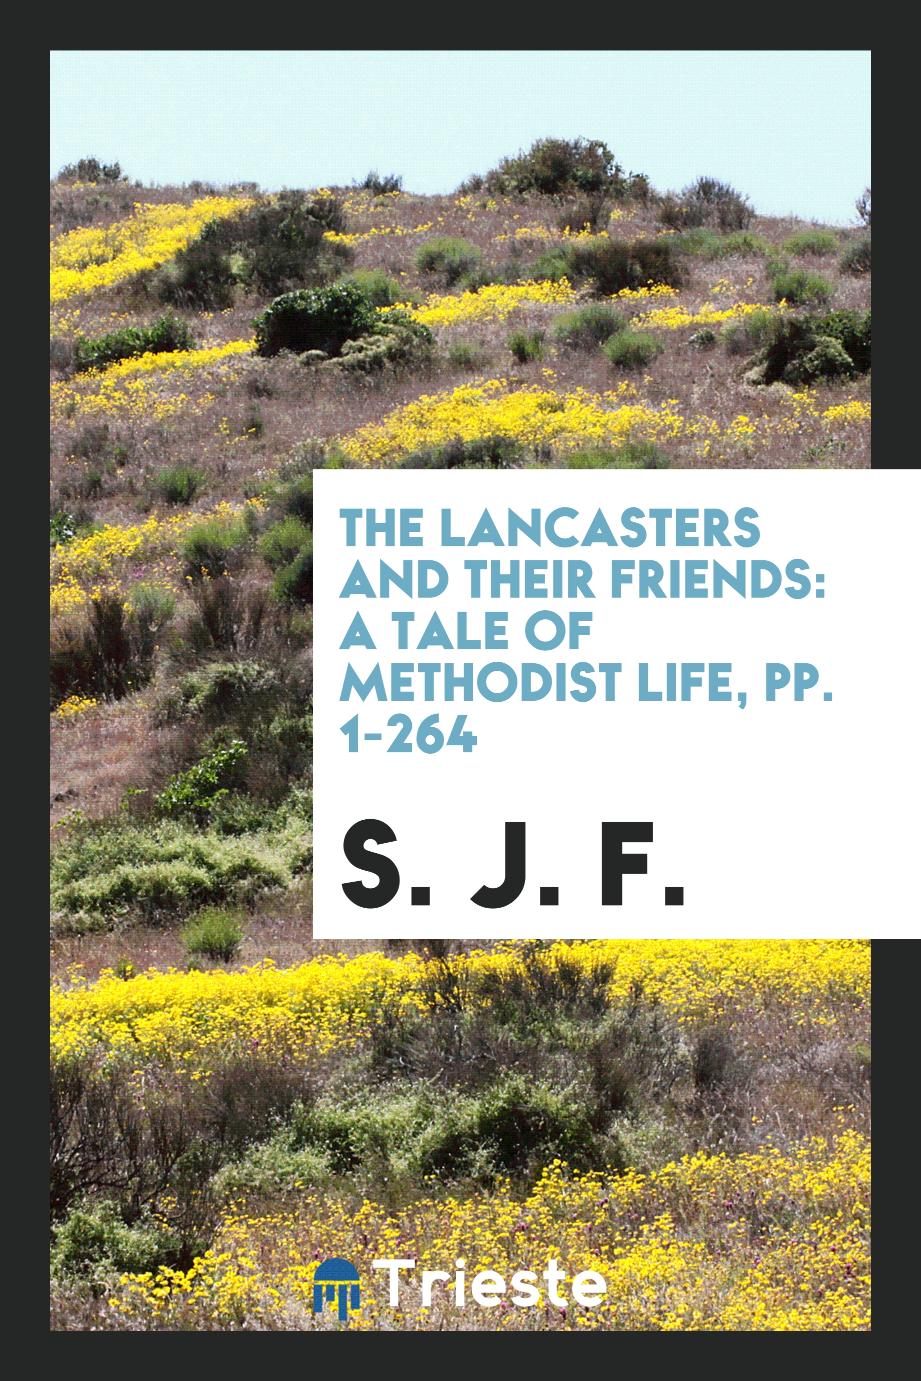 The Lancasters and Their Friends: A Tale of Methodist Life, pp. 1-264